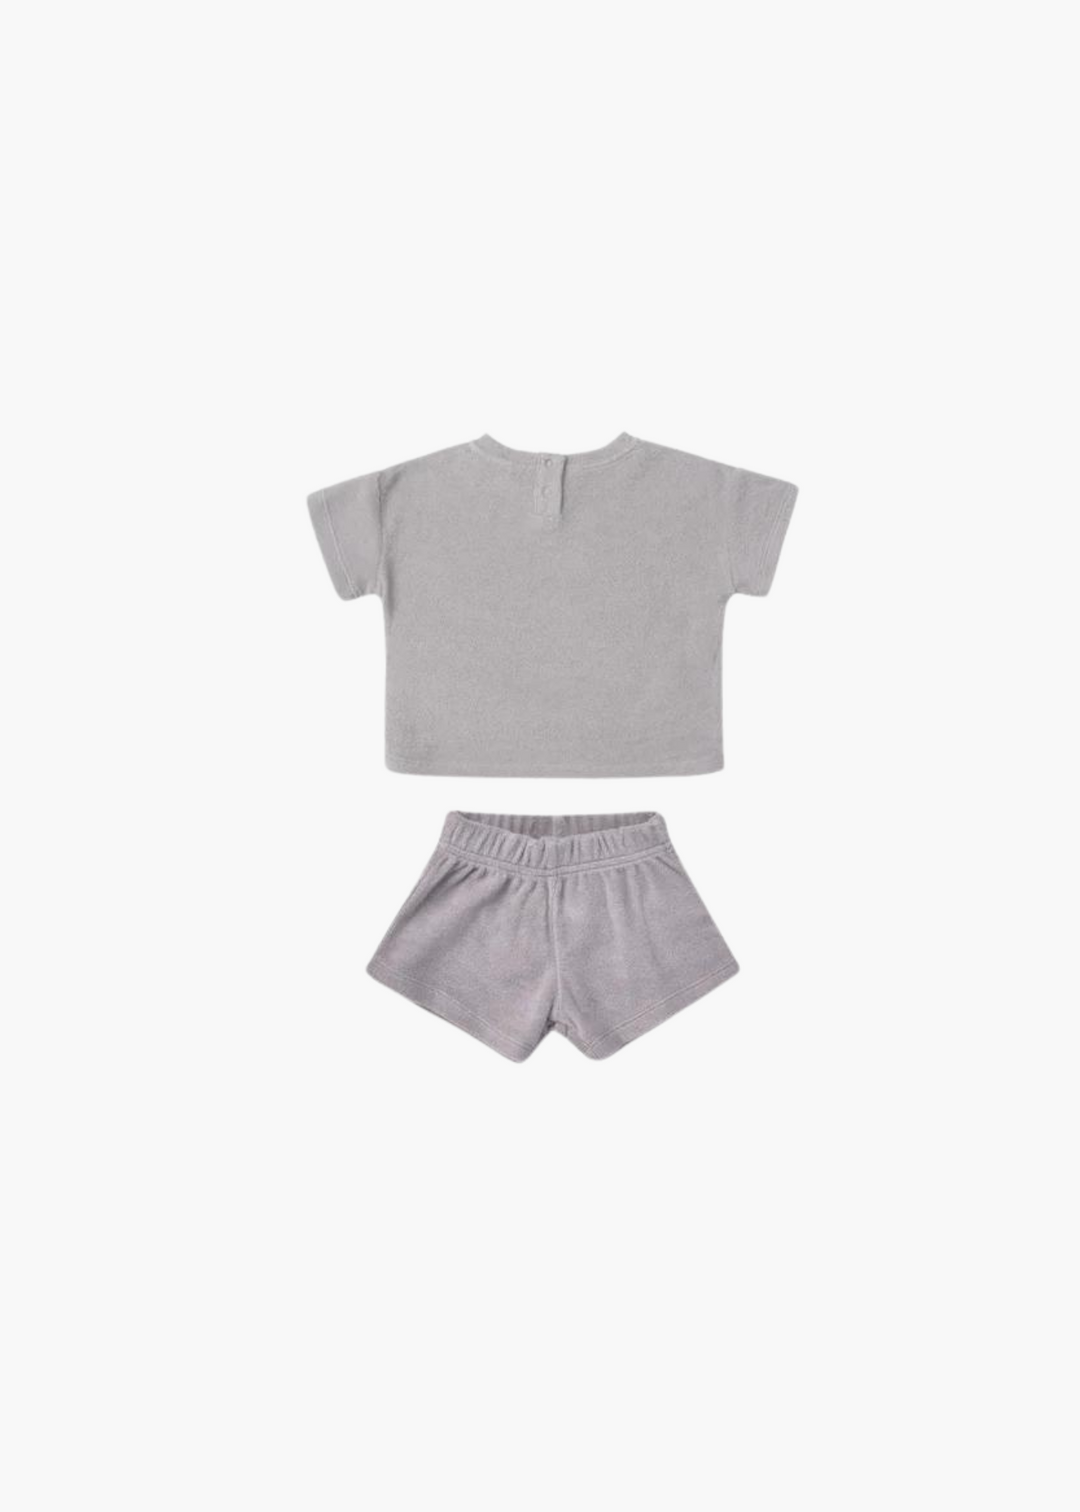 terry tee + shorts set || periwinkle